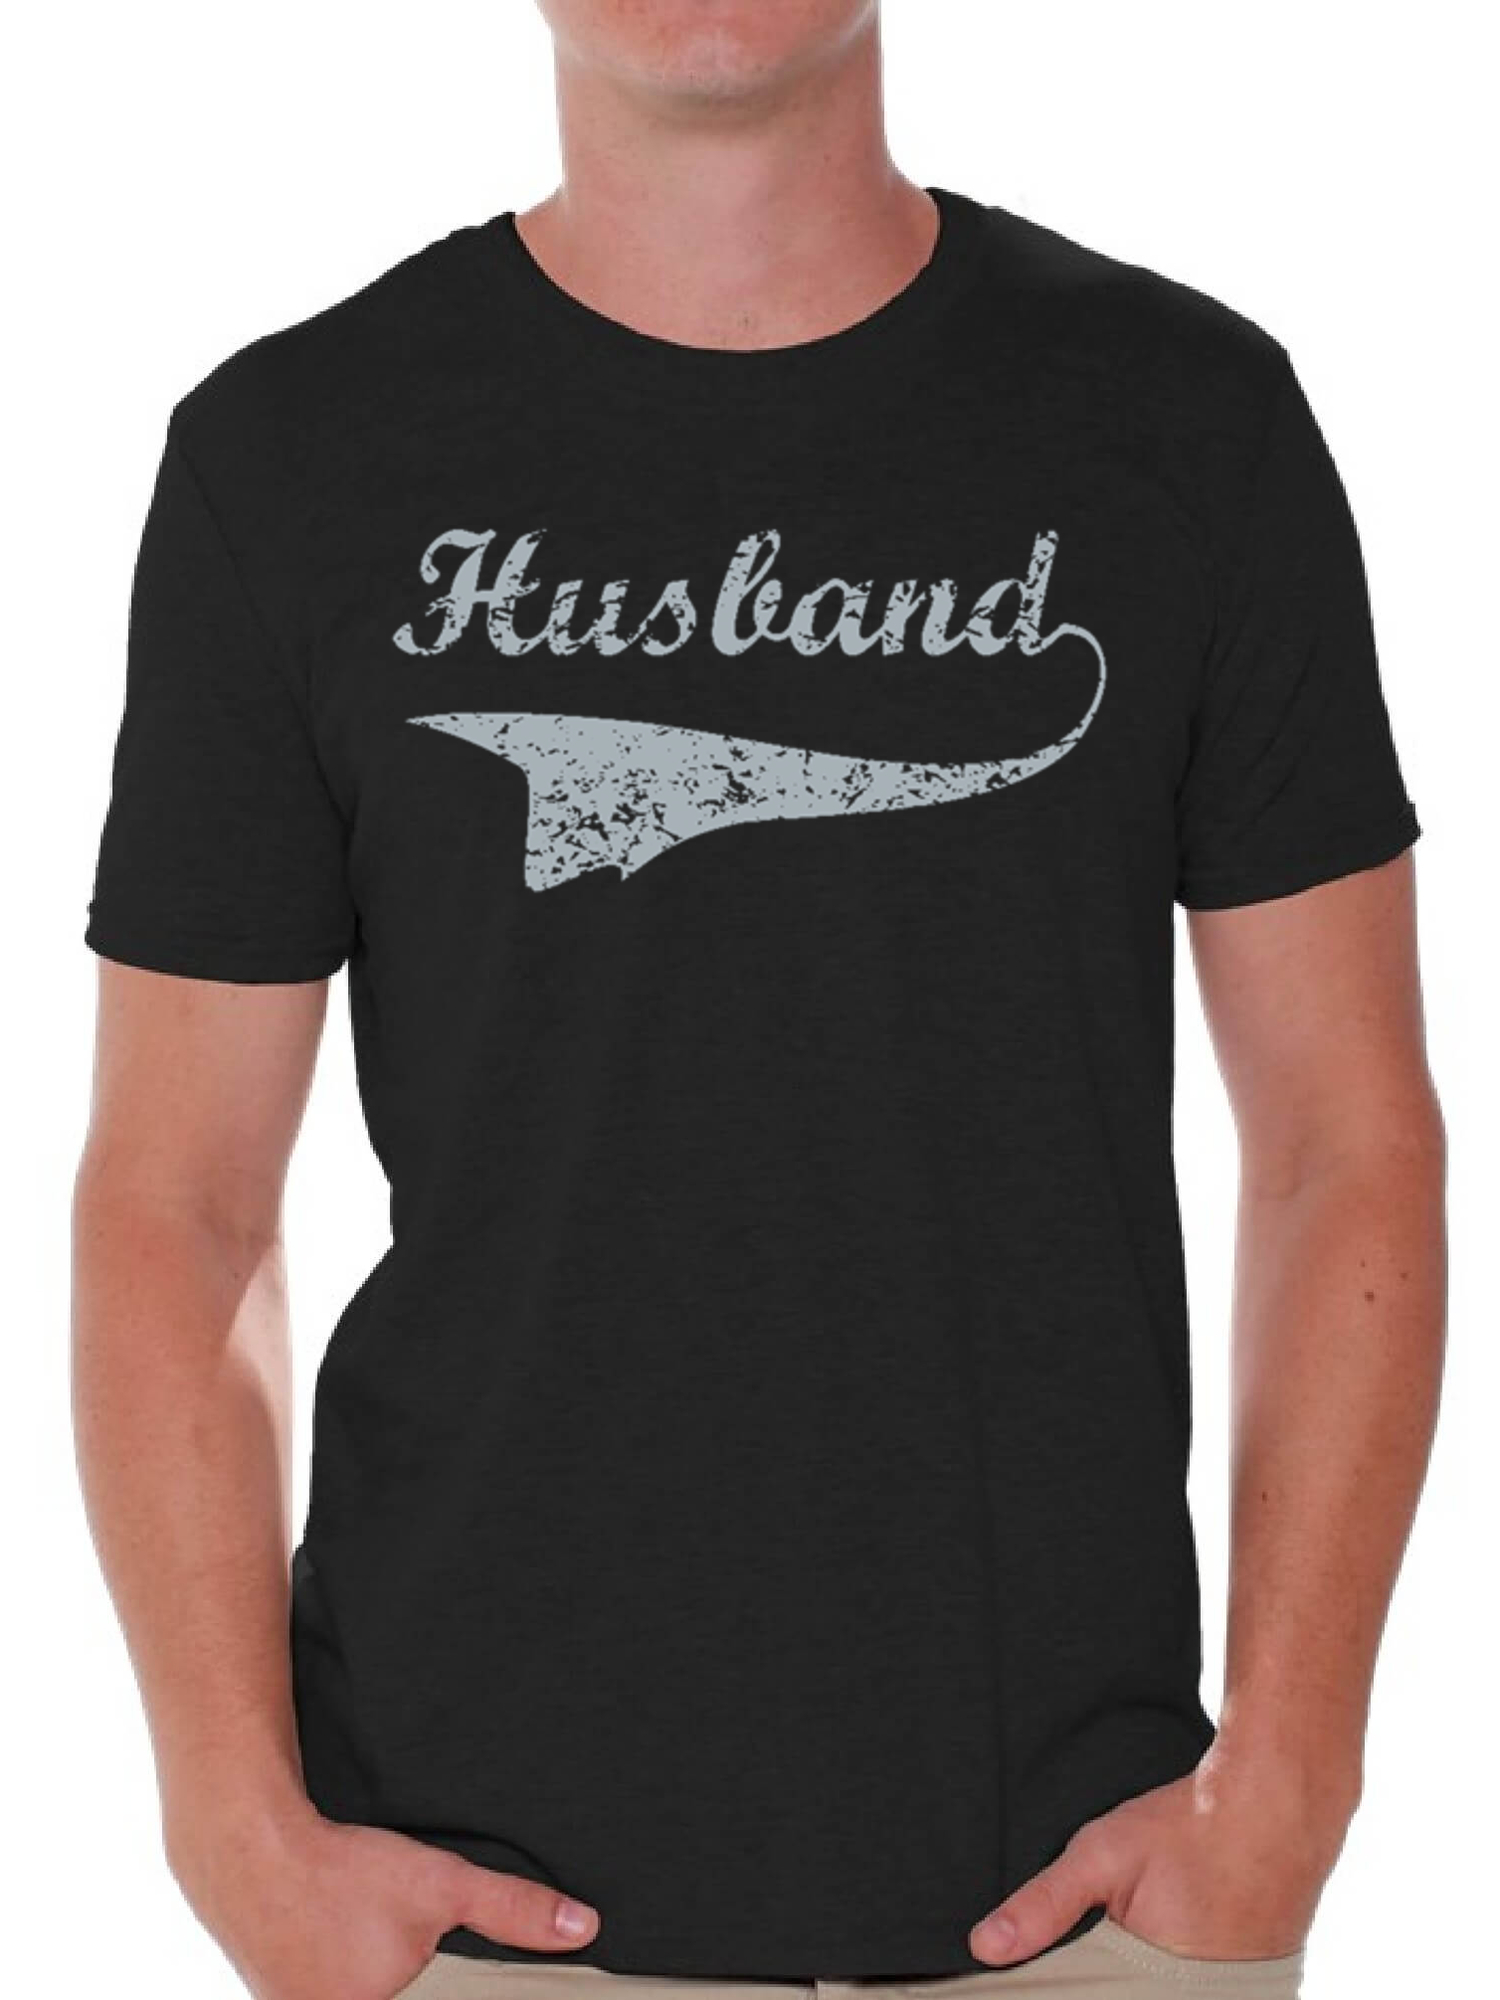 Awkward Styles Husband T Shirt for Men Husband Shirt for Him Husband Design Beloved Husband Gifts Cute T-Shirt for Men Funny Hubby T-Shirt Husband Clothing Collection Anniversary Gifts for Husband - image 1 of 4